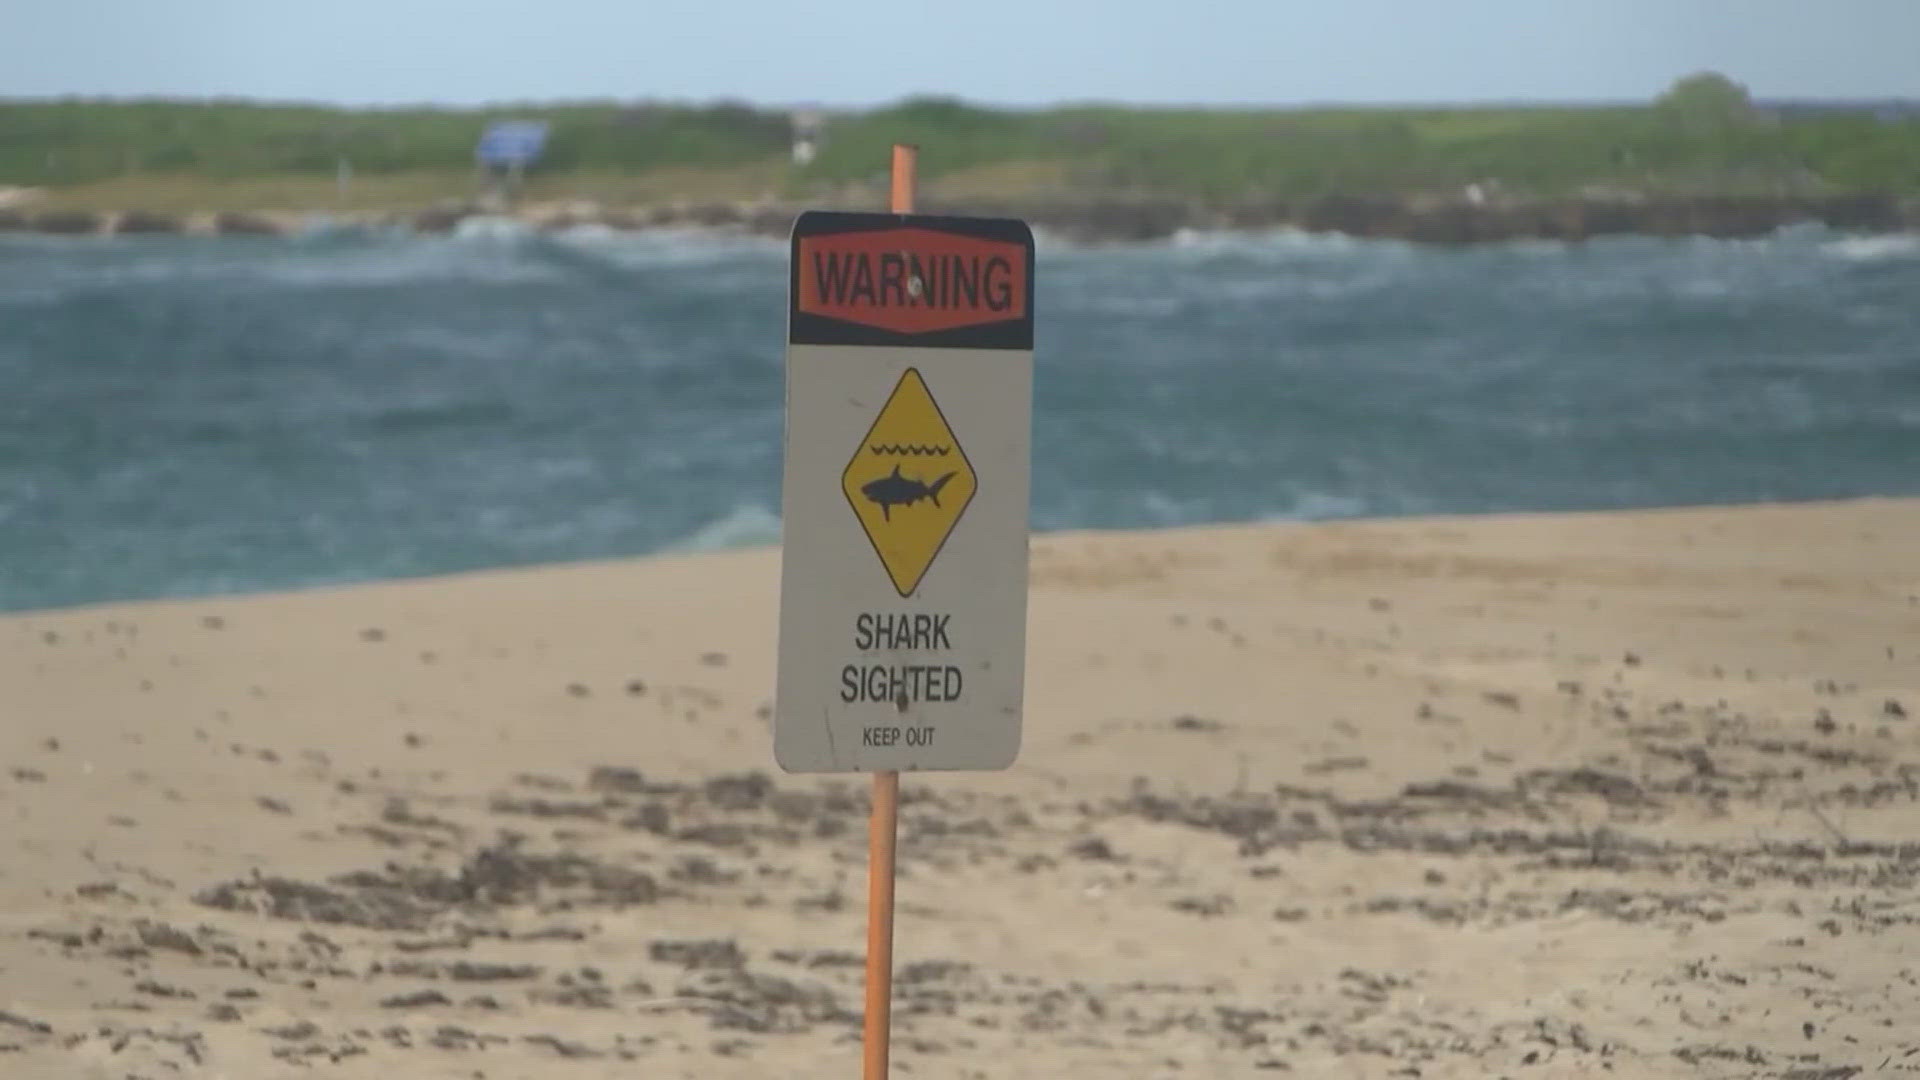 Officials say they got the call Sunday about a surfer fatally injured in a shark attack on the north shore. Perry was pronounced dead at the scene.